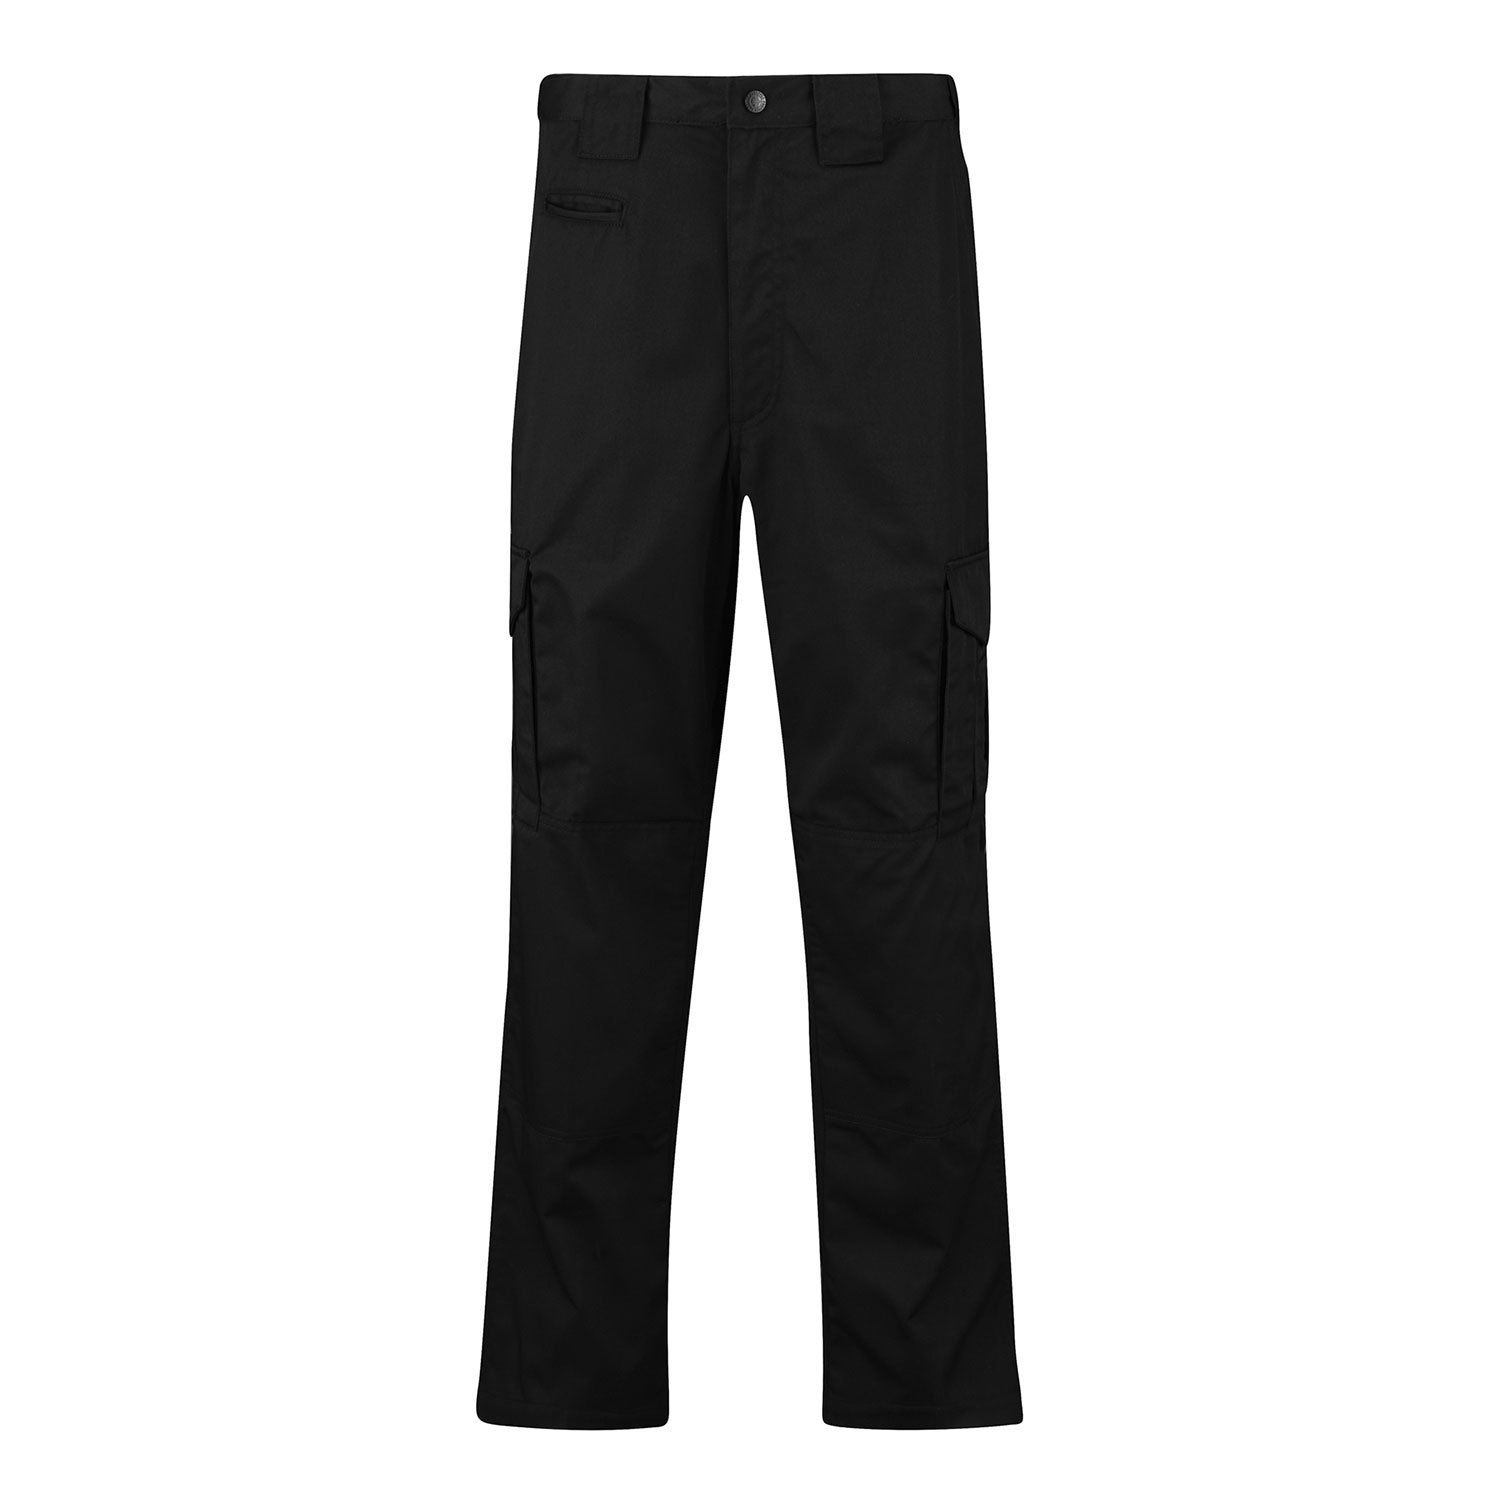 Propper Critical Response Twill EMS Pants